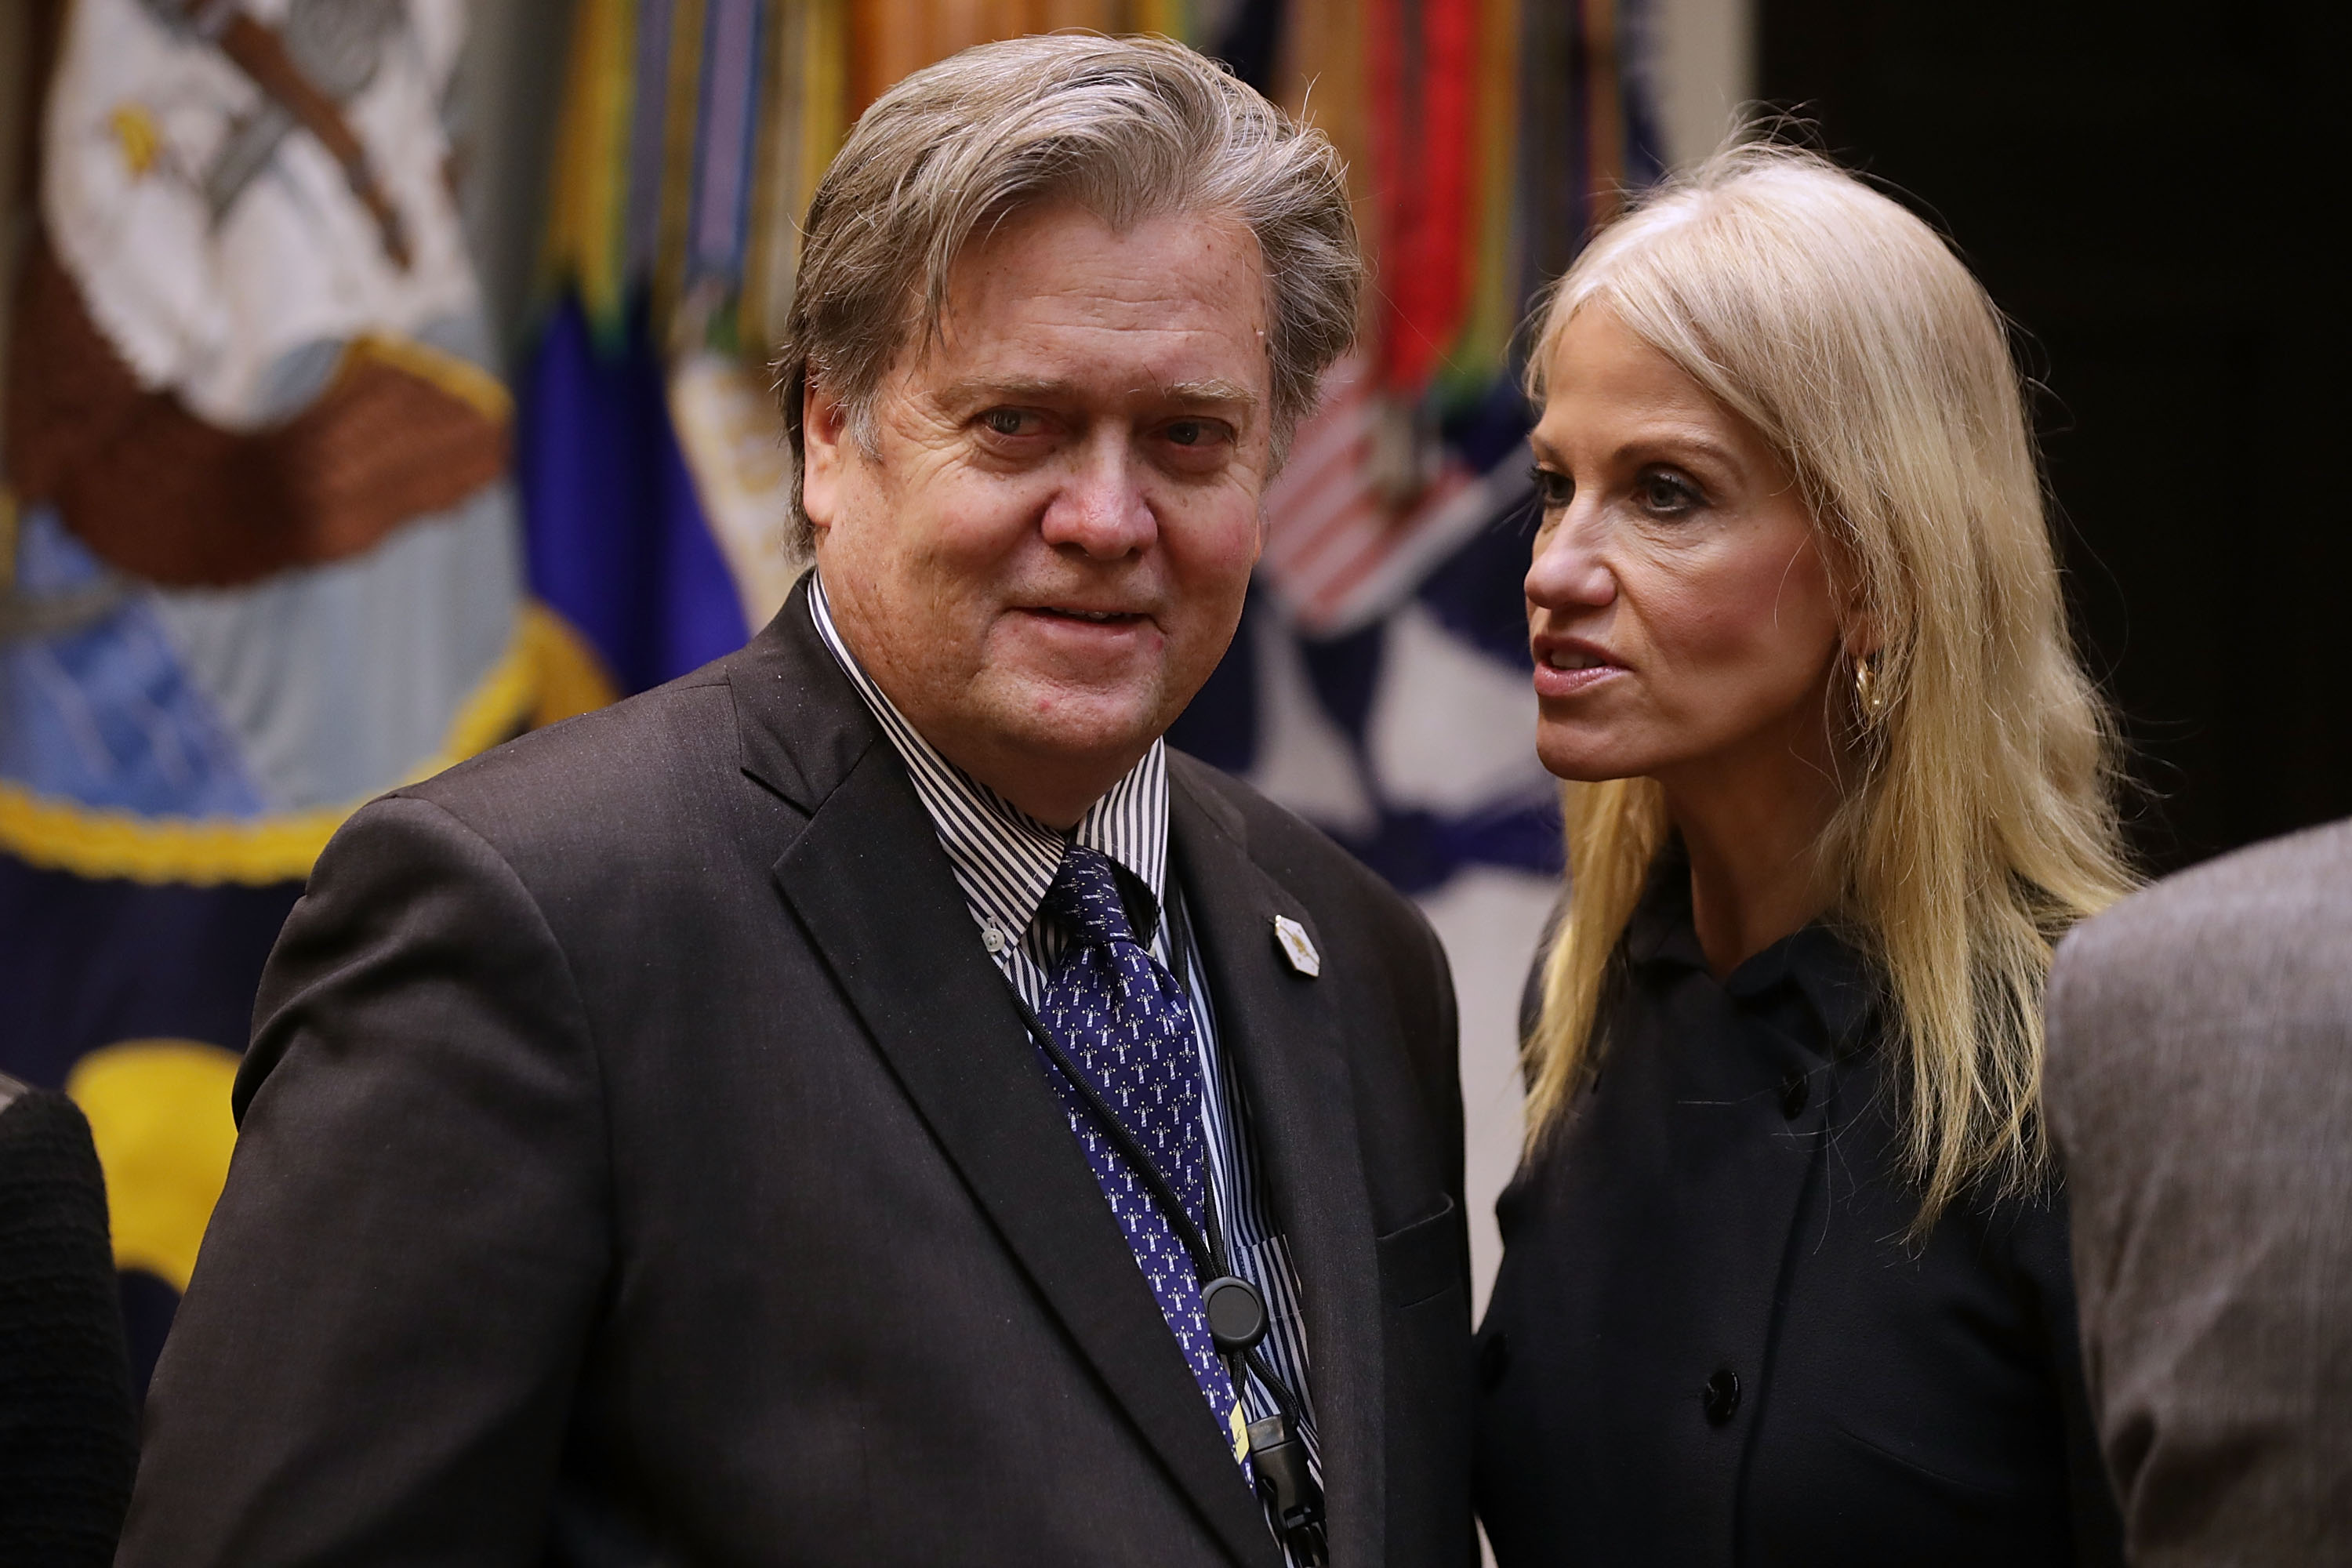 White House Chief Strategist Steve Bannon (L) and Counselor to the President Kellyanne Conway wait for the arrival of U.S. President Donald Trump for a meeting on cyber security in the Roosevelt Room at the White House January 31, 2017 in Washington, DC. (Chip Somodevilla—Getty Images)